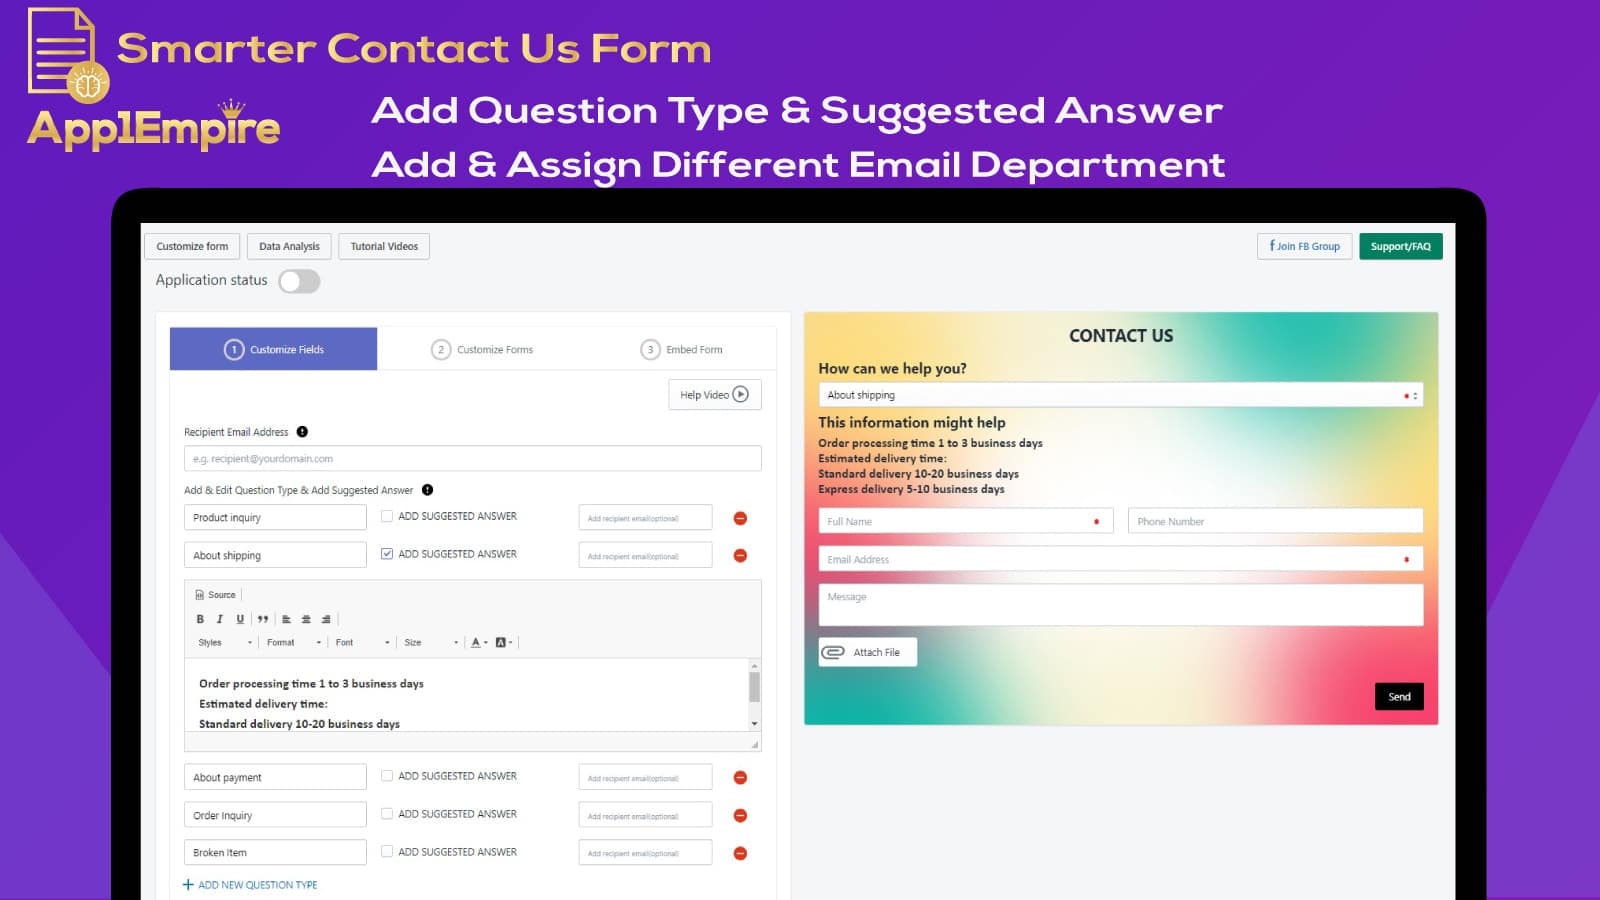 Smarter Contact Us Form